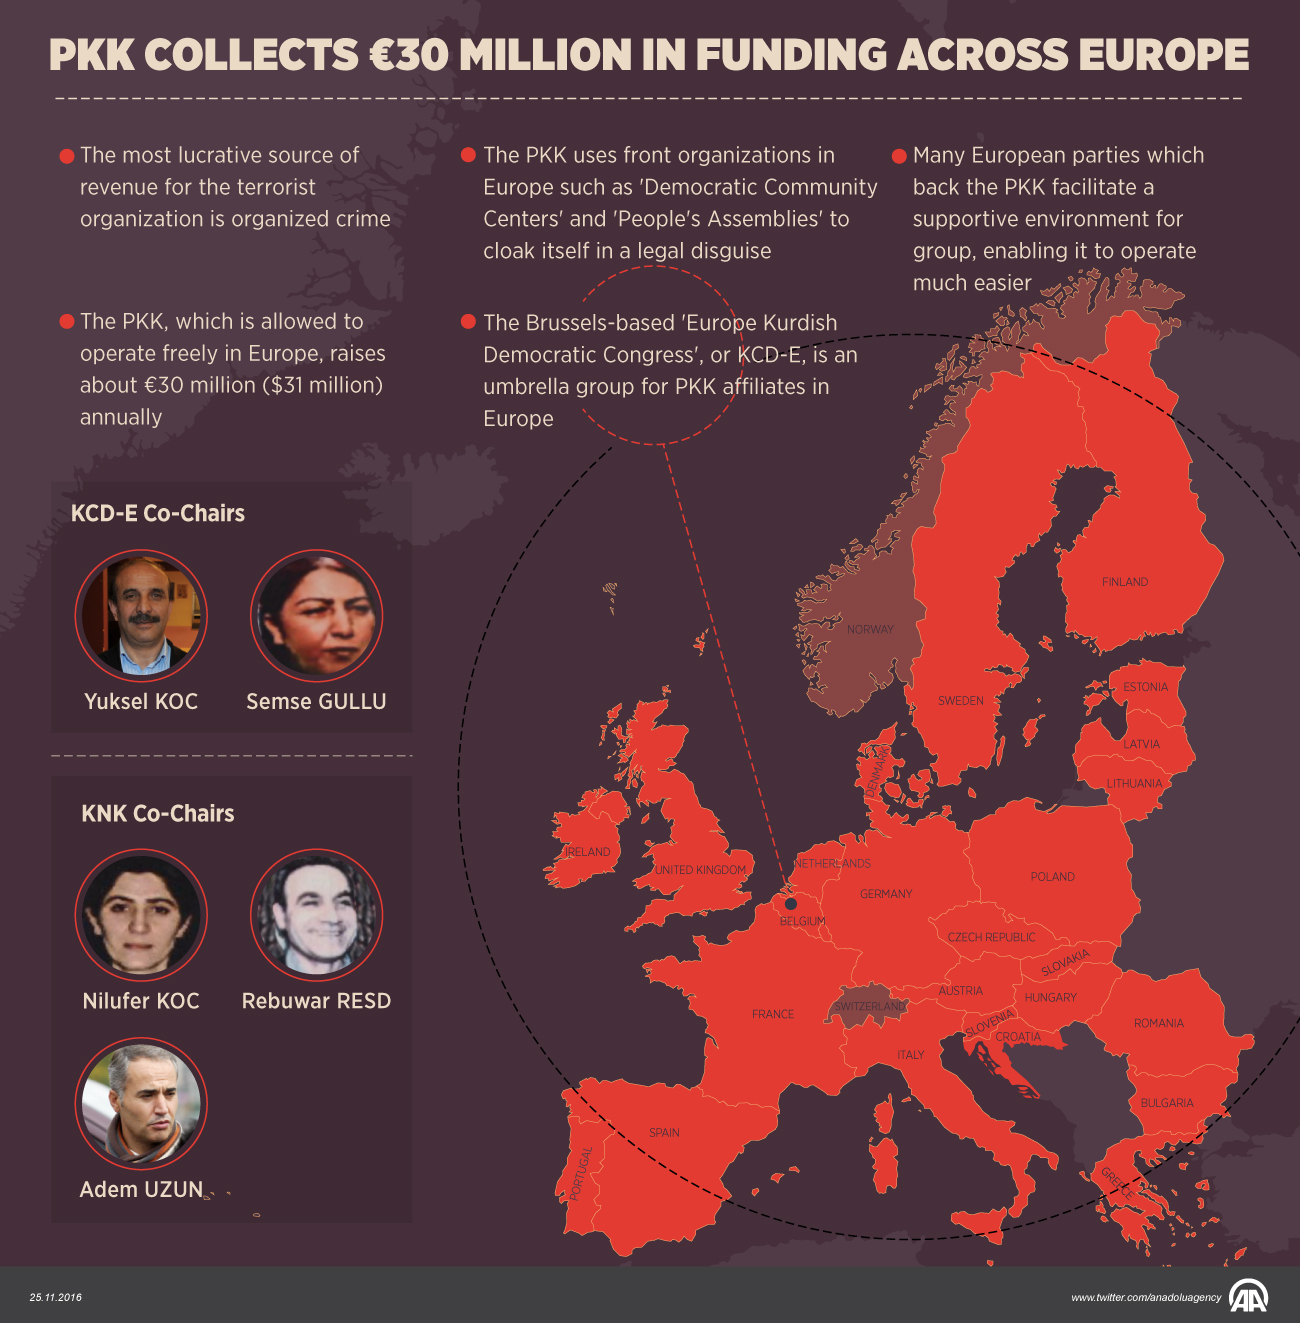 PKK collects €30 million in funding across Europe